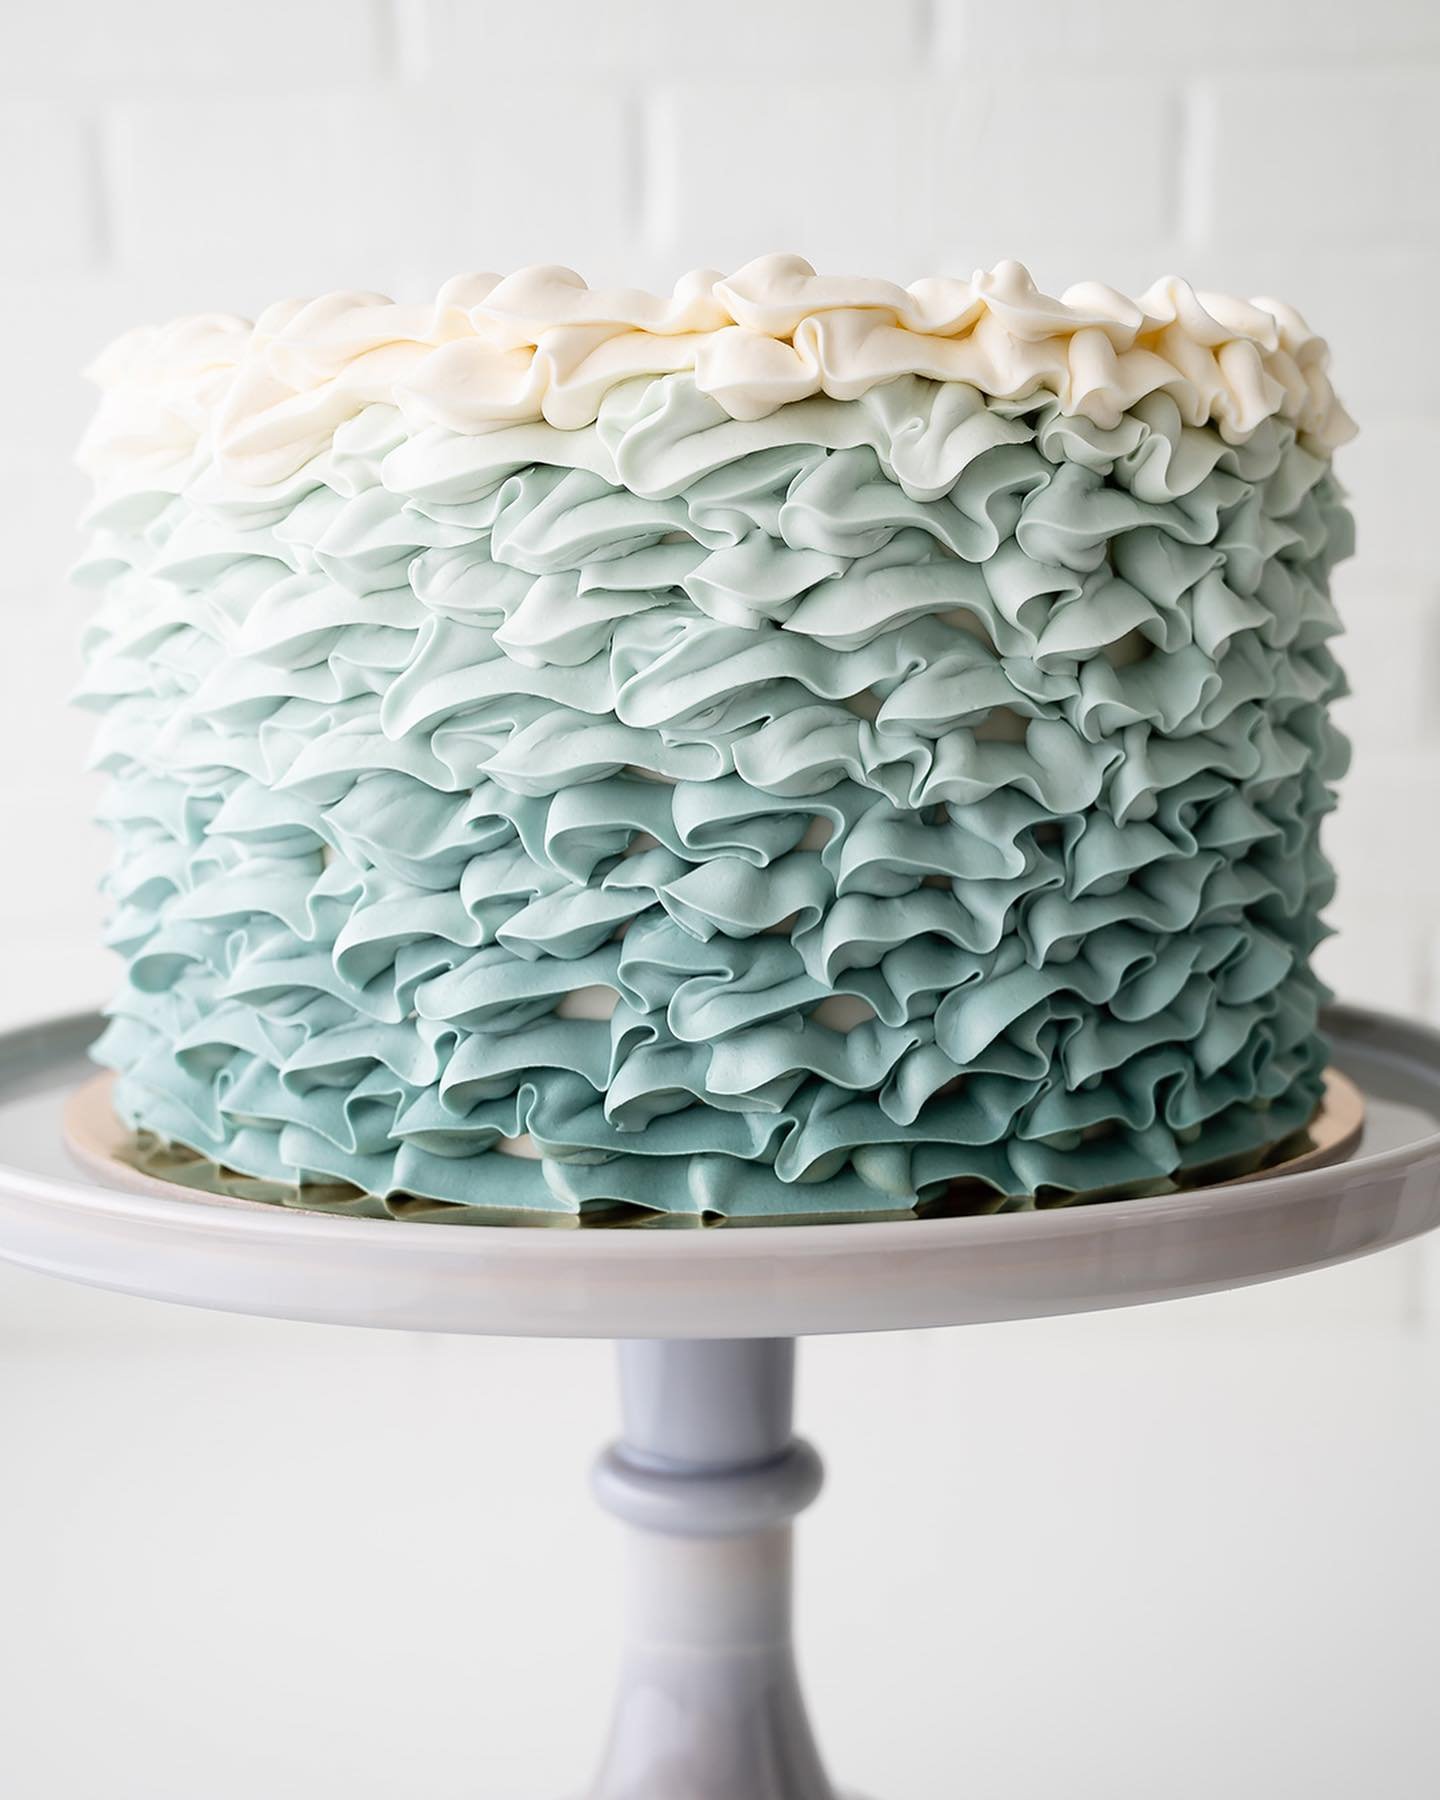 8&rdquo; Ruffle Cake in Sage-to-White ombr&eacute; with Sage icing message 🌿🤍🎂 Customize your next Made-to-Order Cake and submit a preorder request at the bio link.